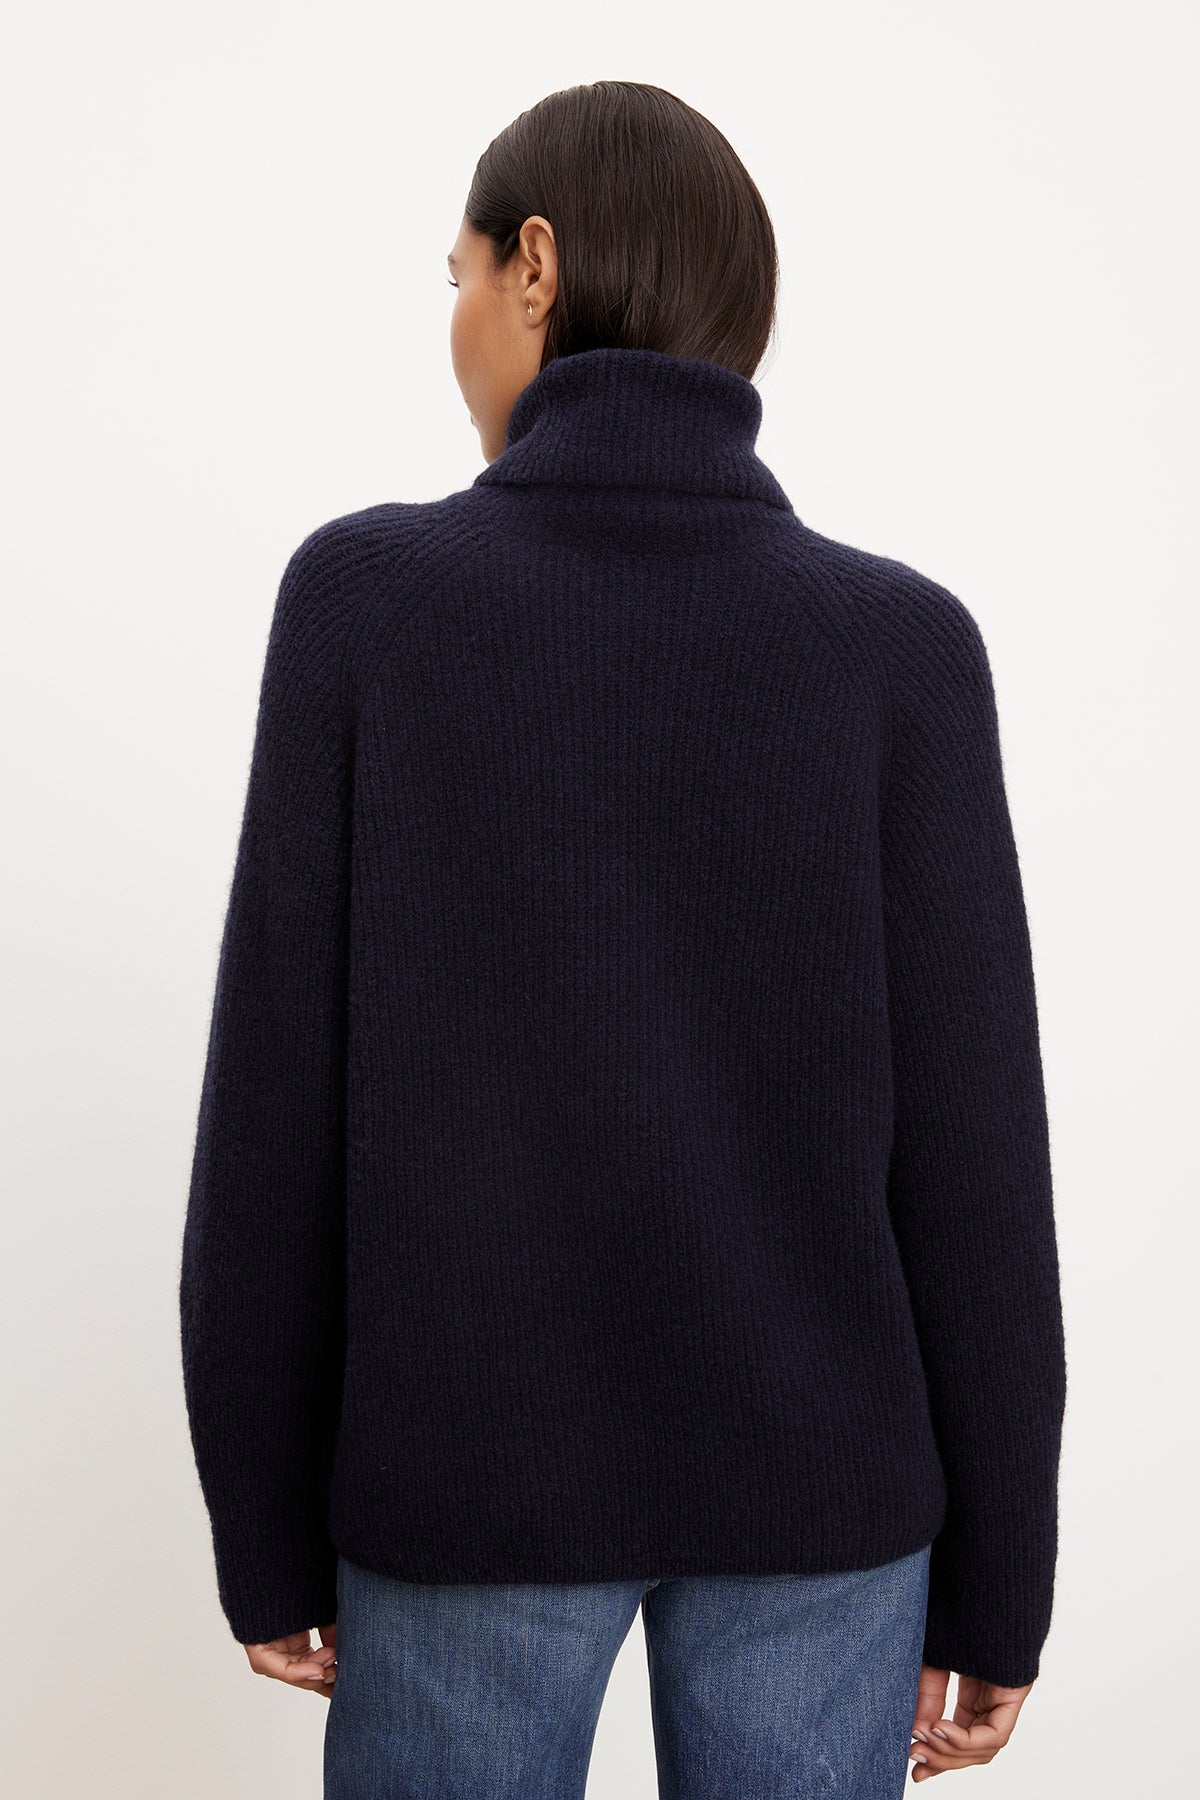 The woman wearing a Velvet by Graham & Spencer navy Judith turtleneck sweater exudes cozy dressing.-35577840435393